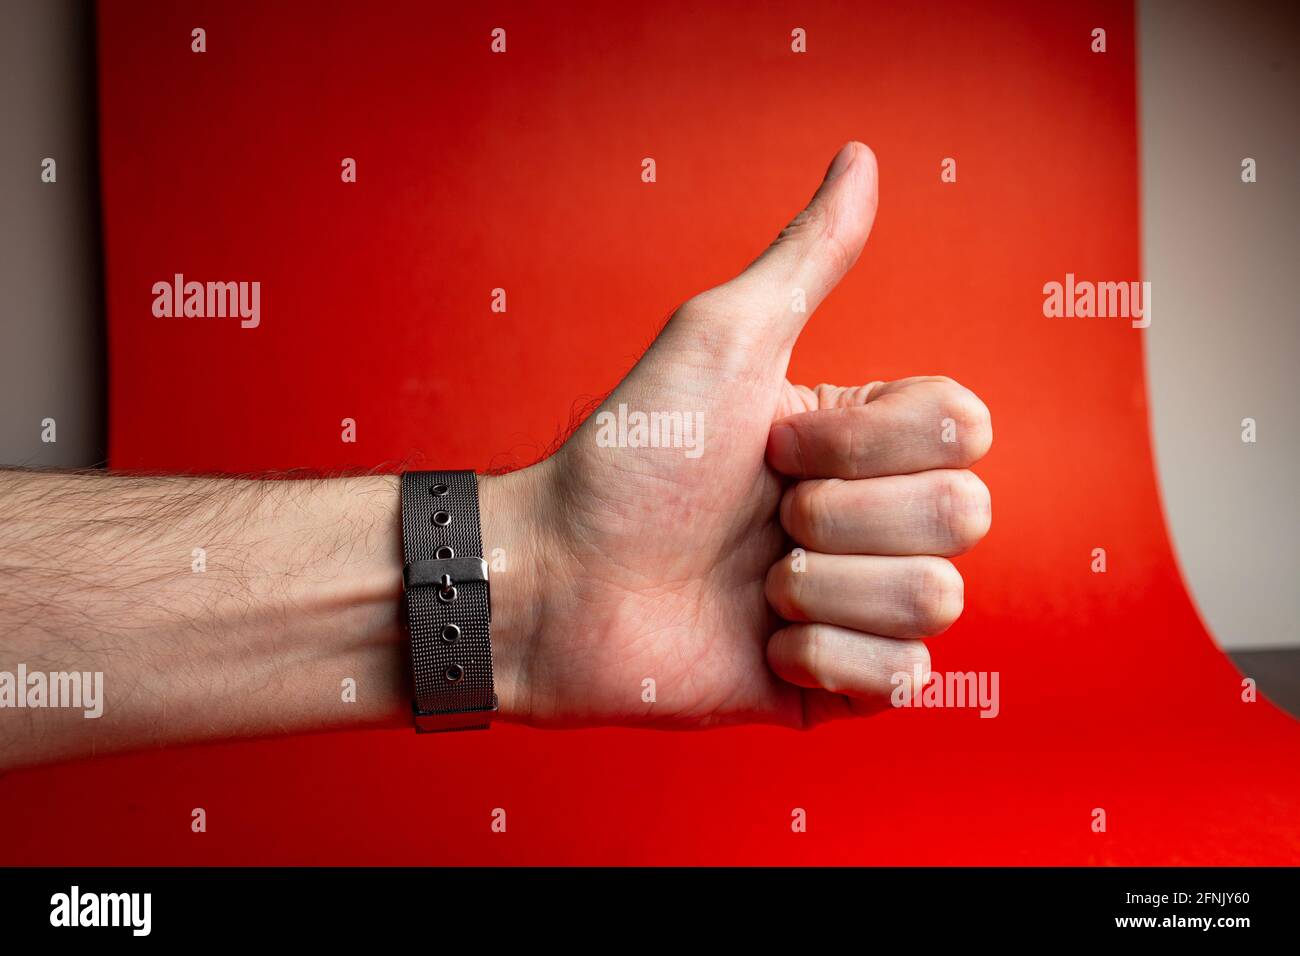 Men's hand with watch shows thumb on red background Stock Photo